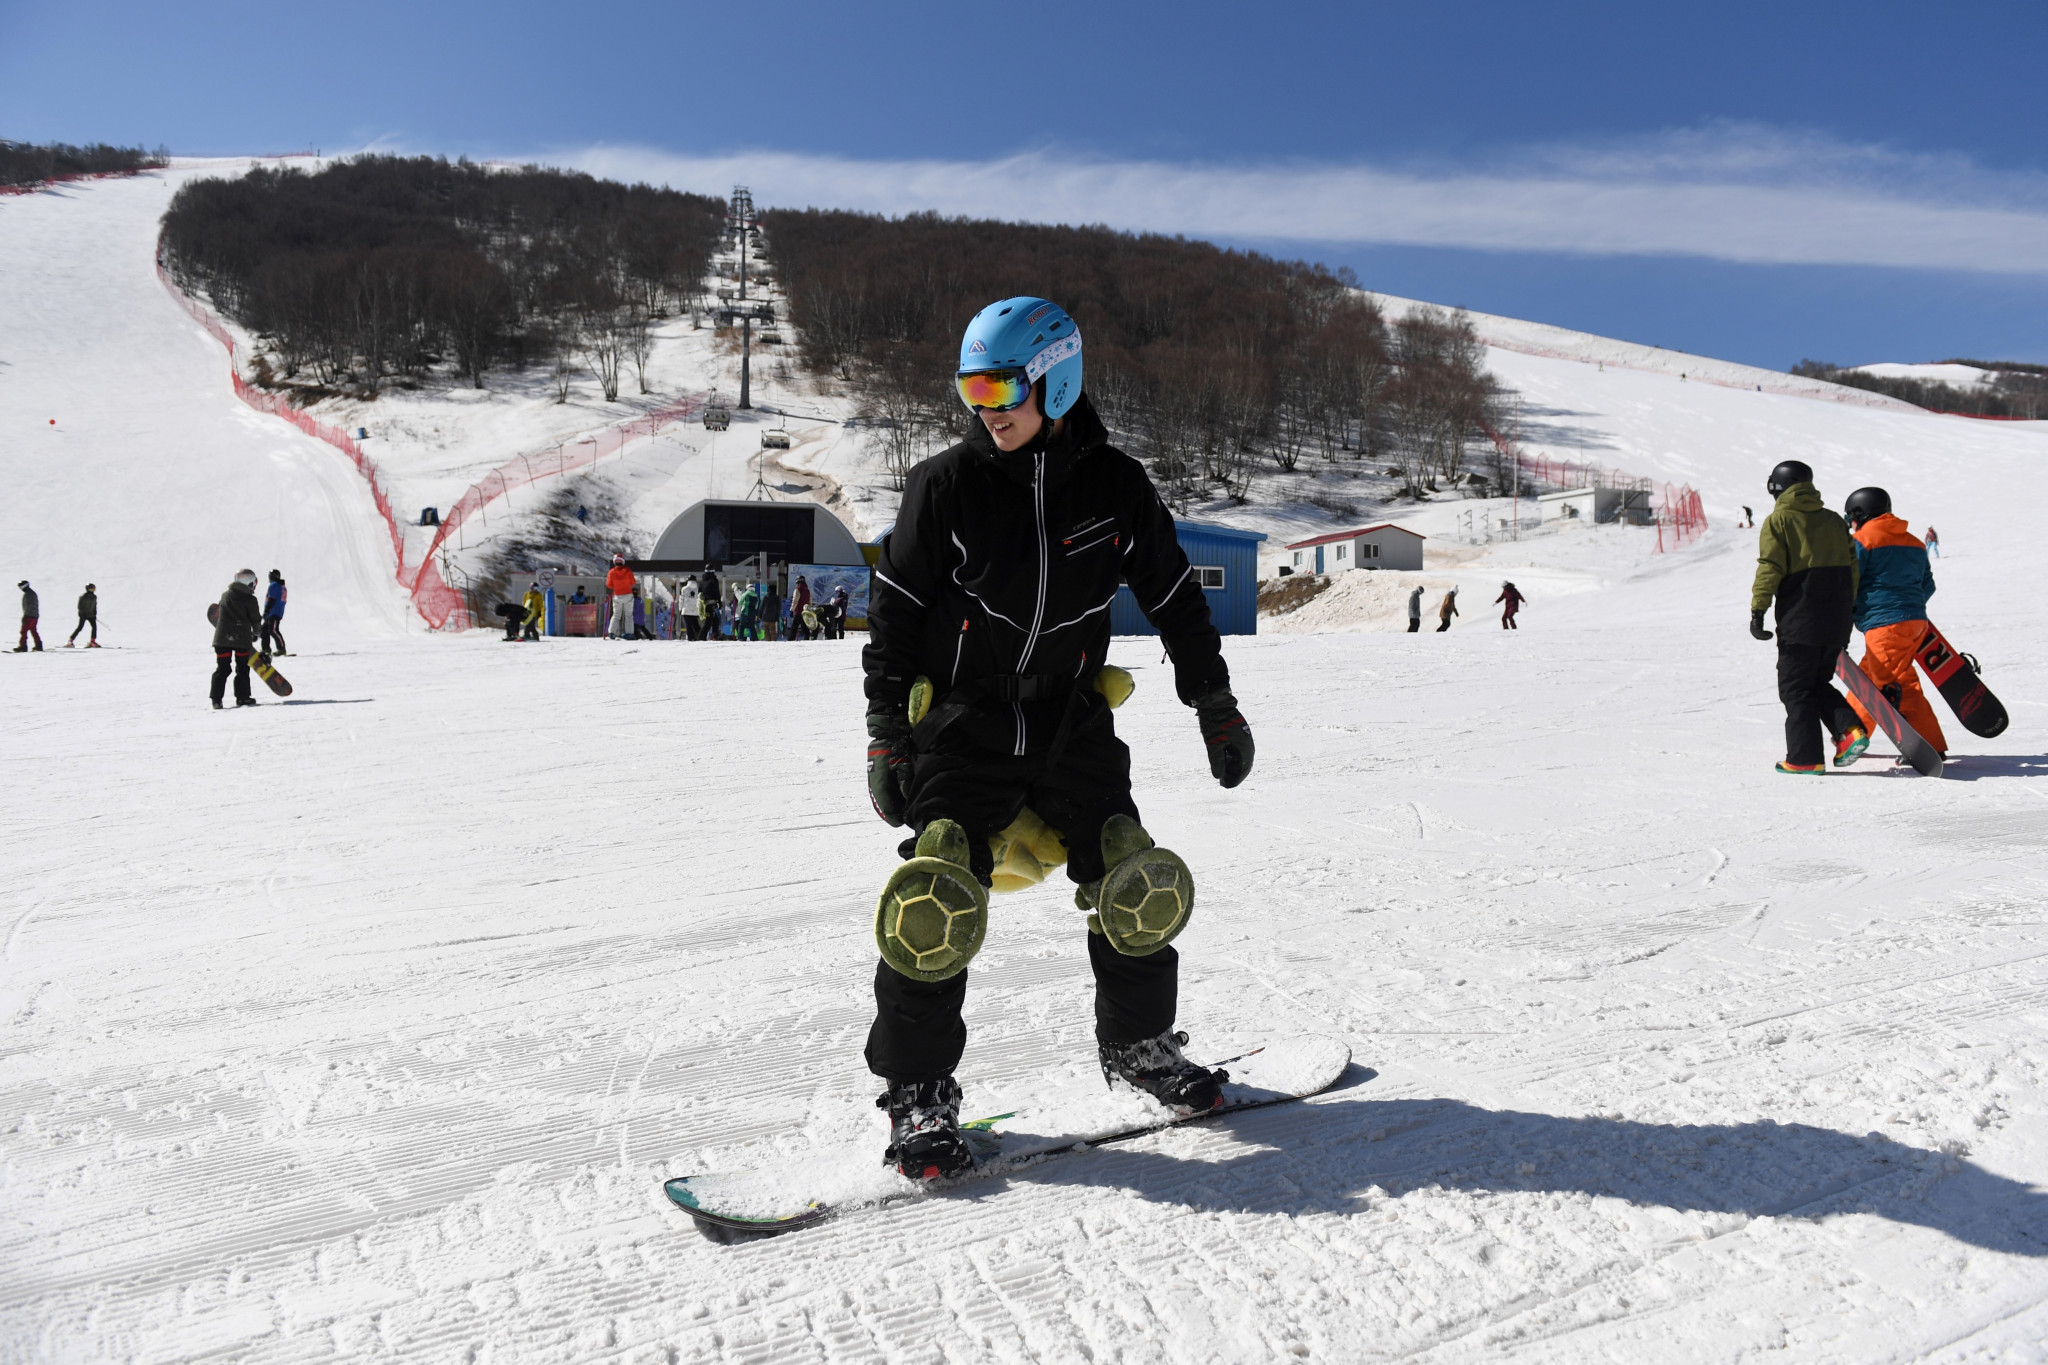 The Chinese Government are aiming to have 300 million snow sport enthusiasts by the Beijing 2022 Winter Games, with the Ecole Française de Ski ski academy in China hoping to contribute to this number ©Getty Images